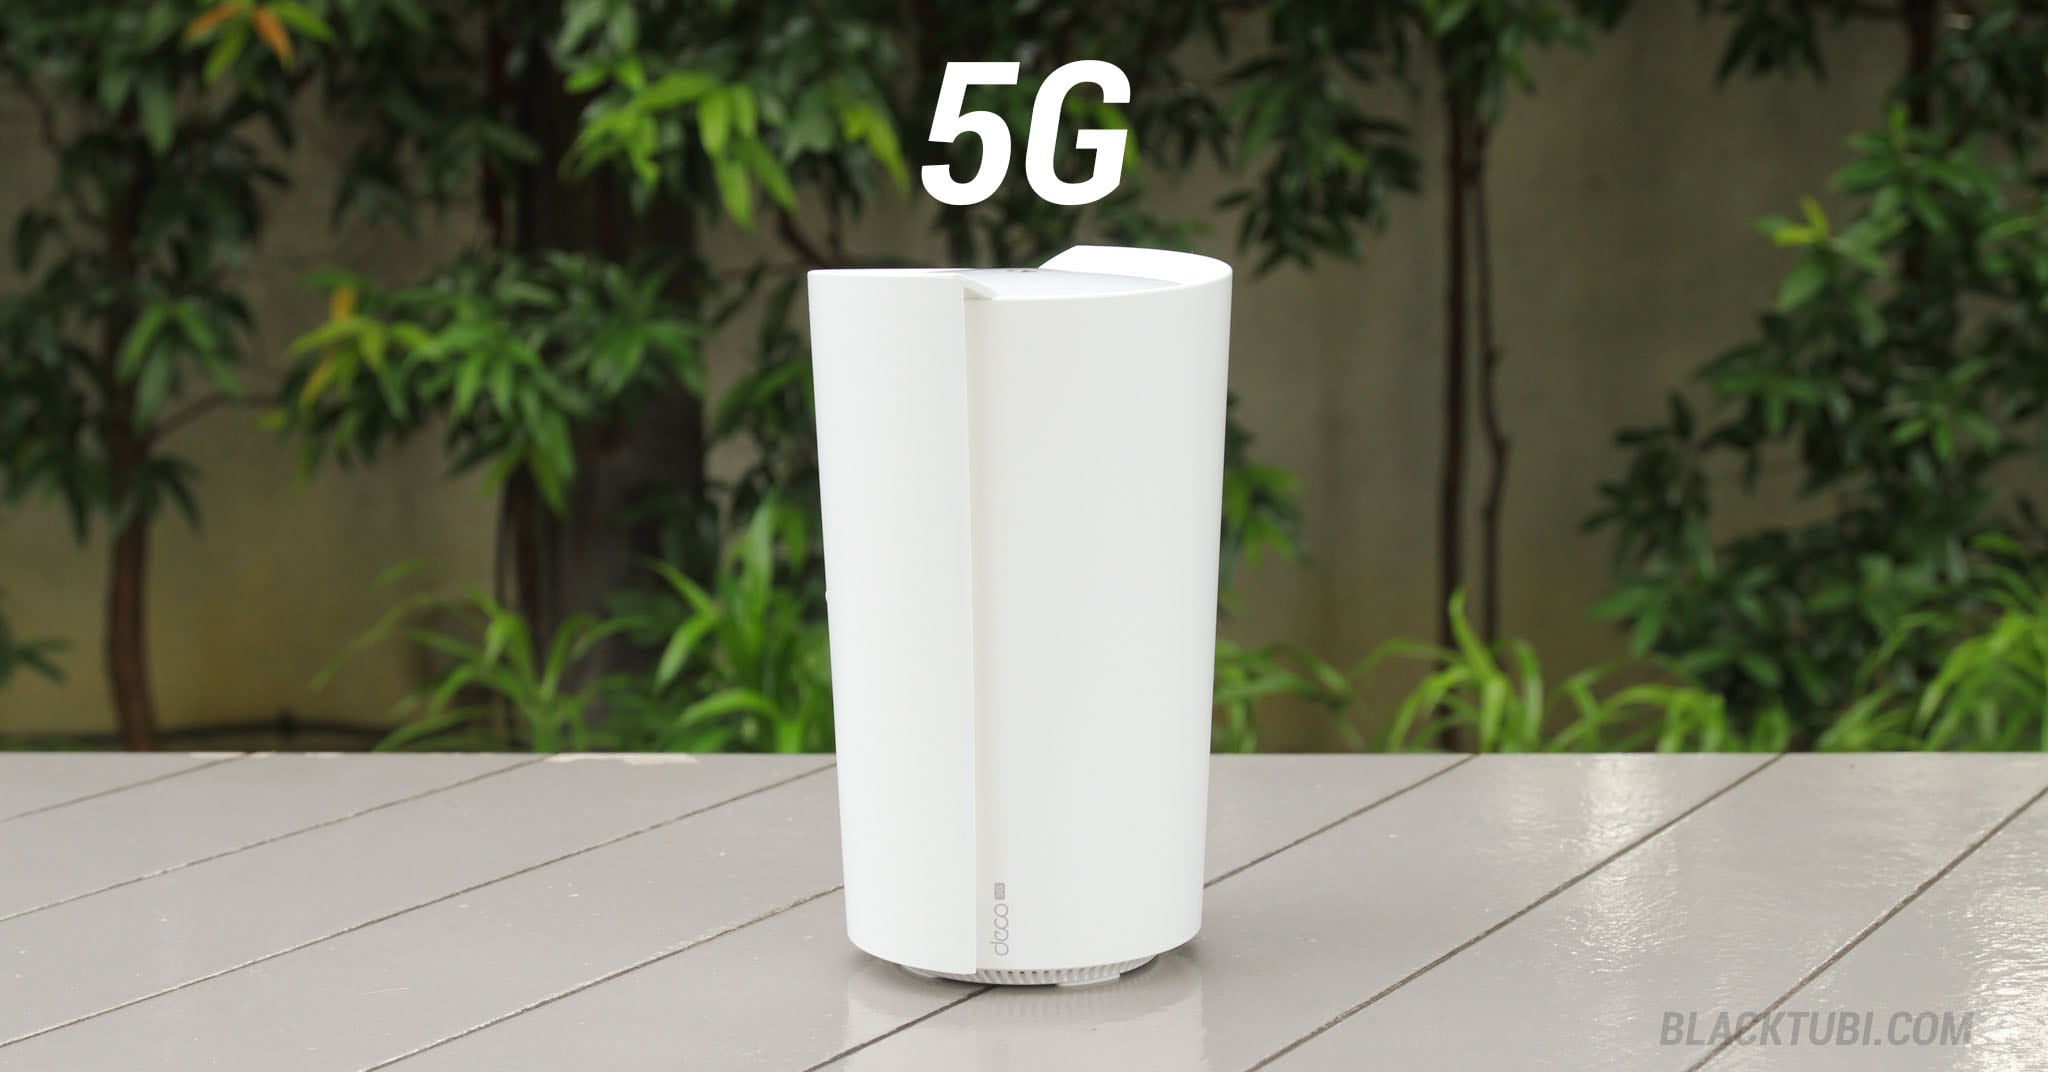 TP-Link's Deco X50 5G Mesh System Is An Alternative To Fixed Broadband